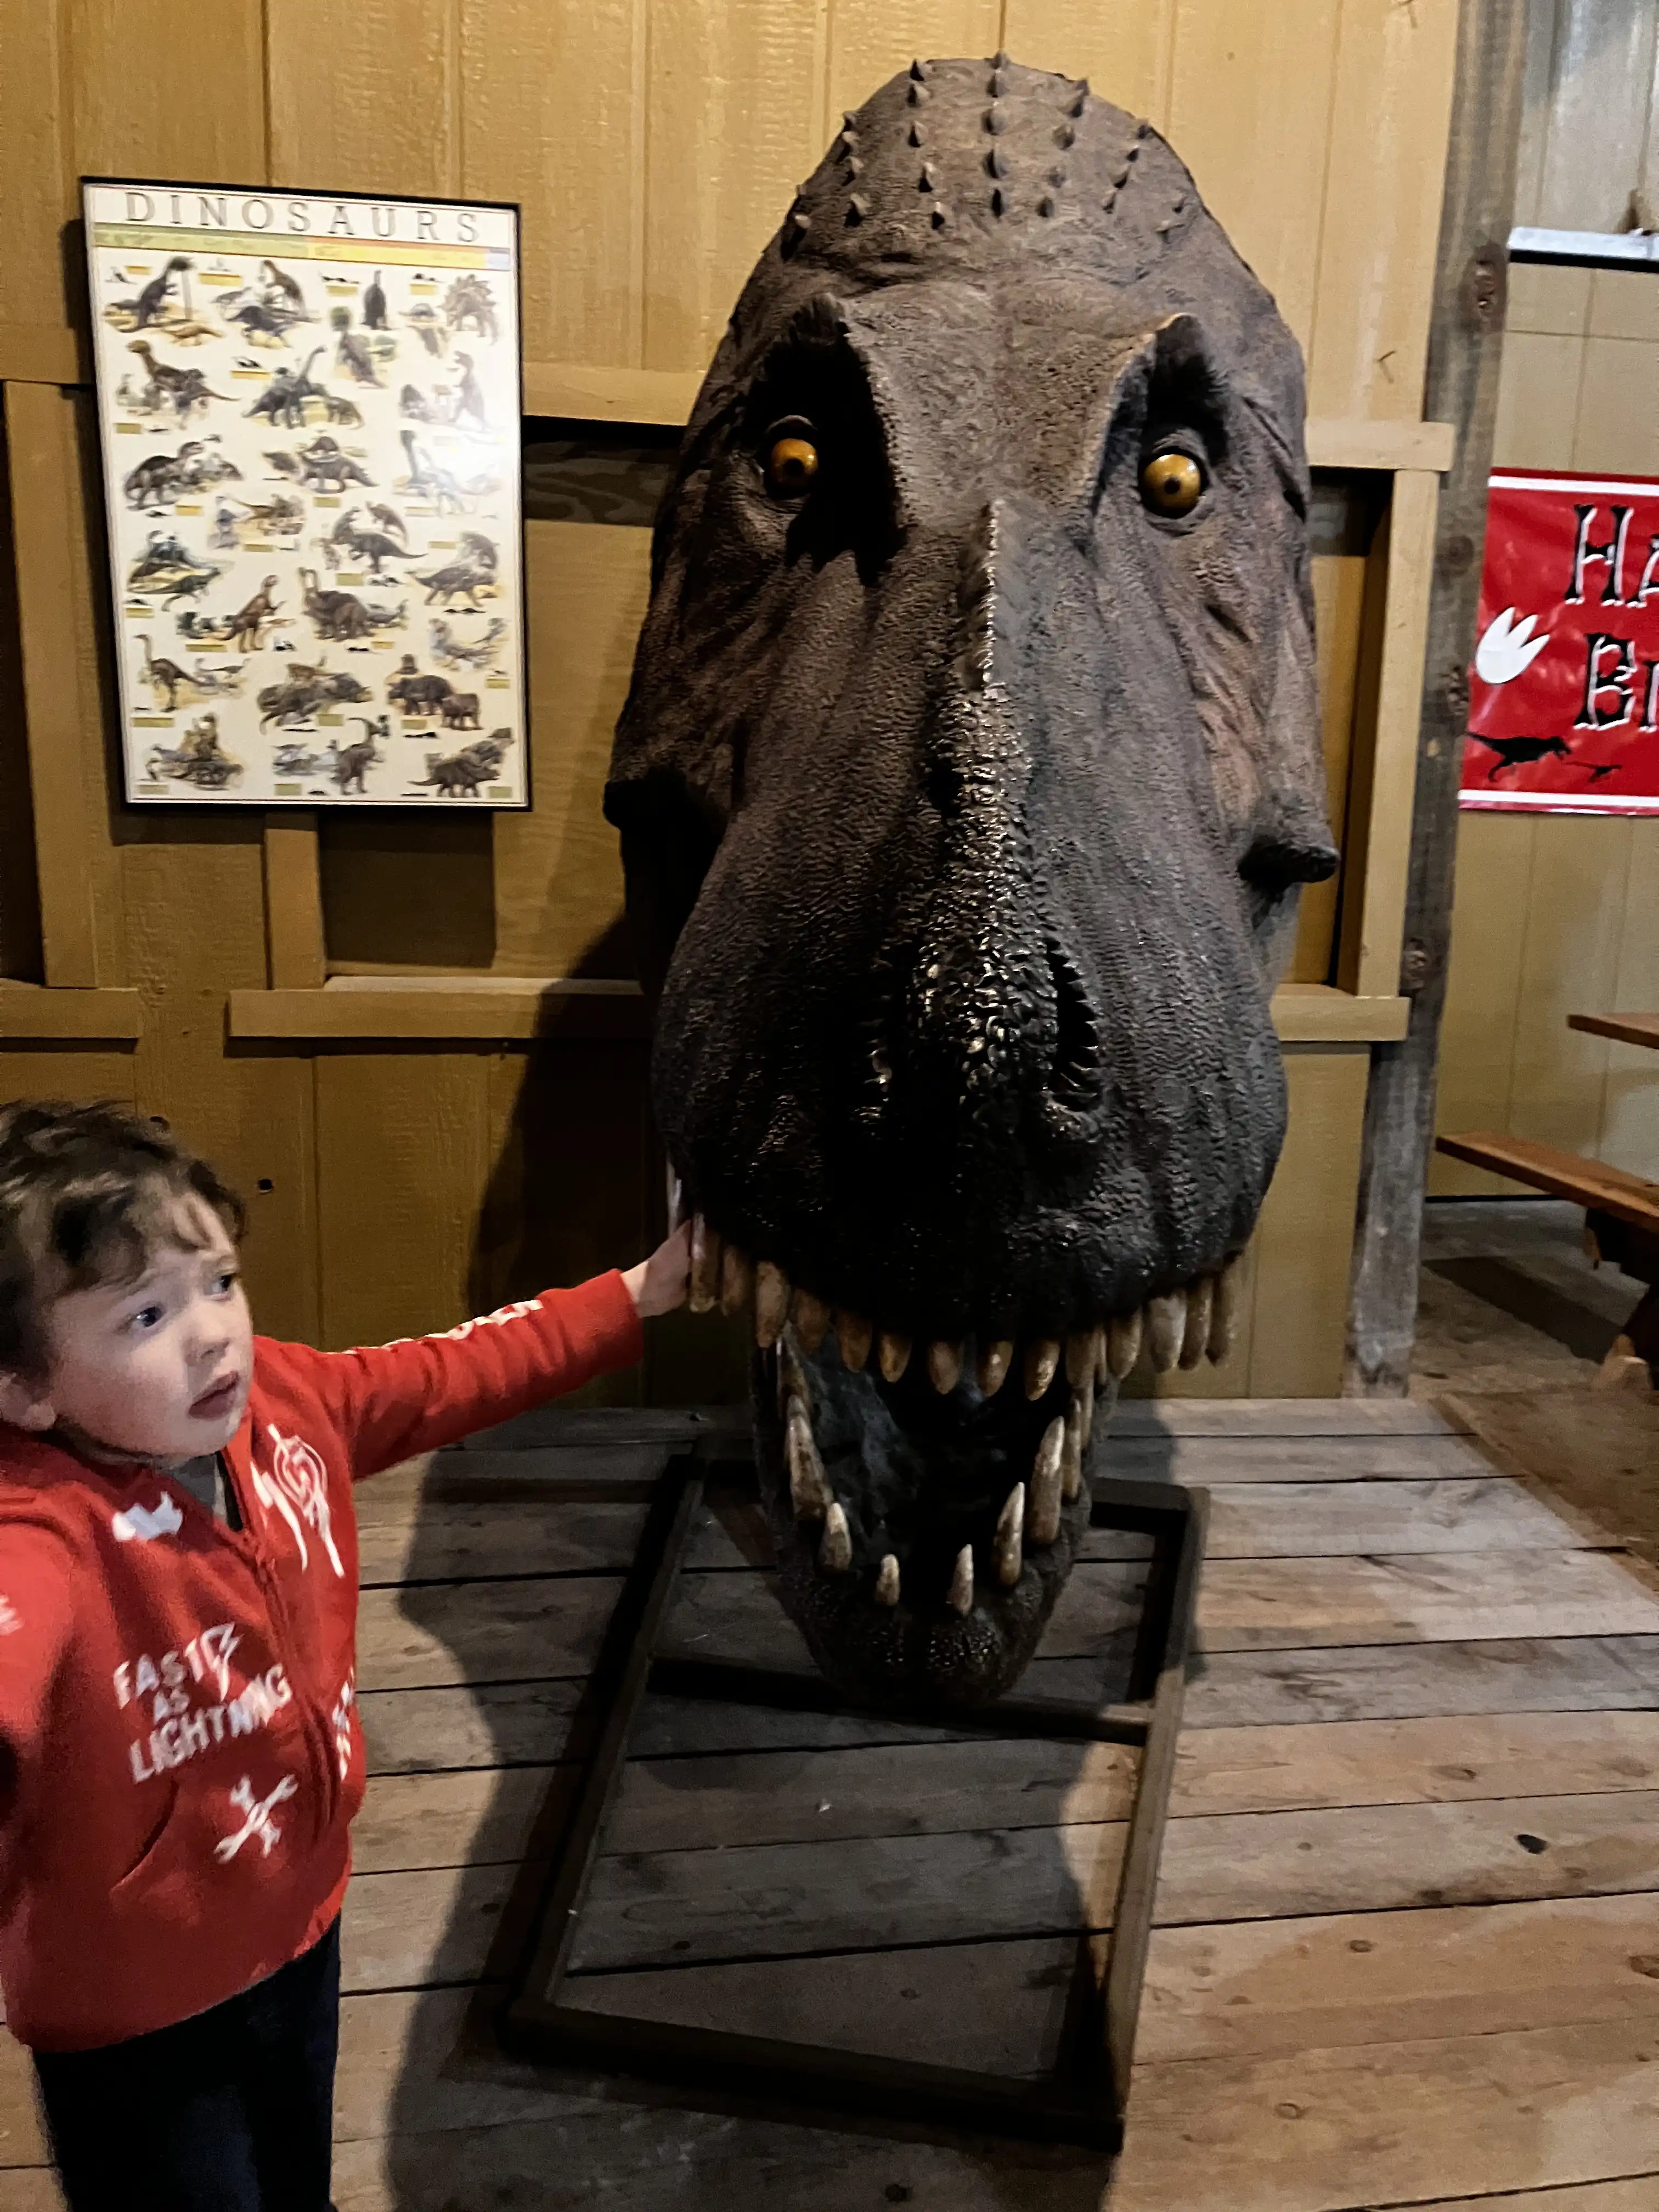 Graham, with a worried expression, puts his hand into the mouth of a life-size T-Rex head like it's going to be bitten off.